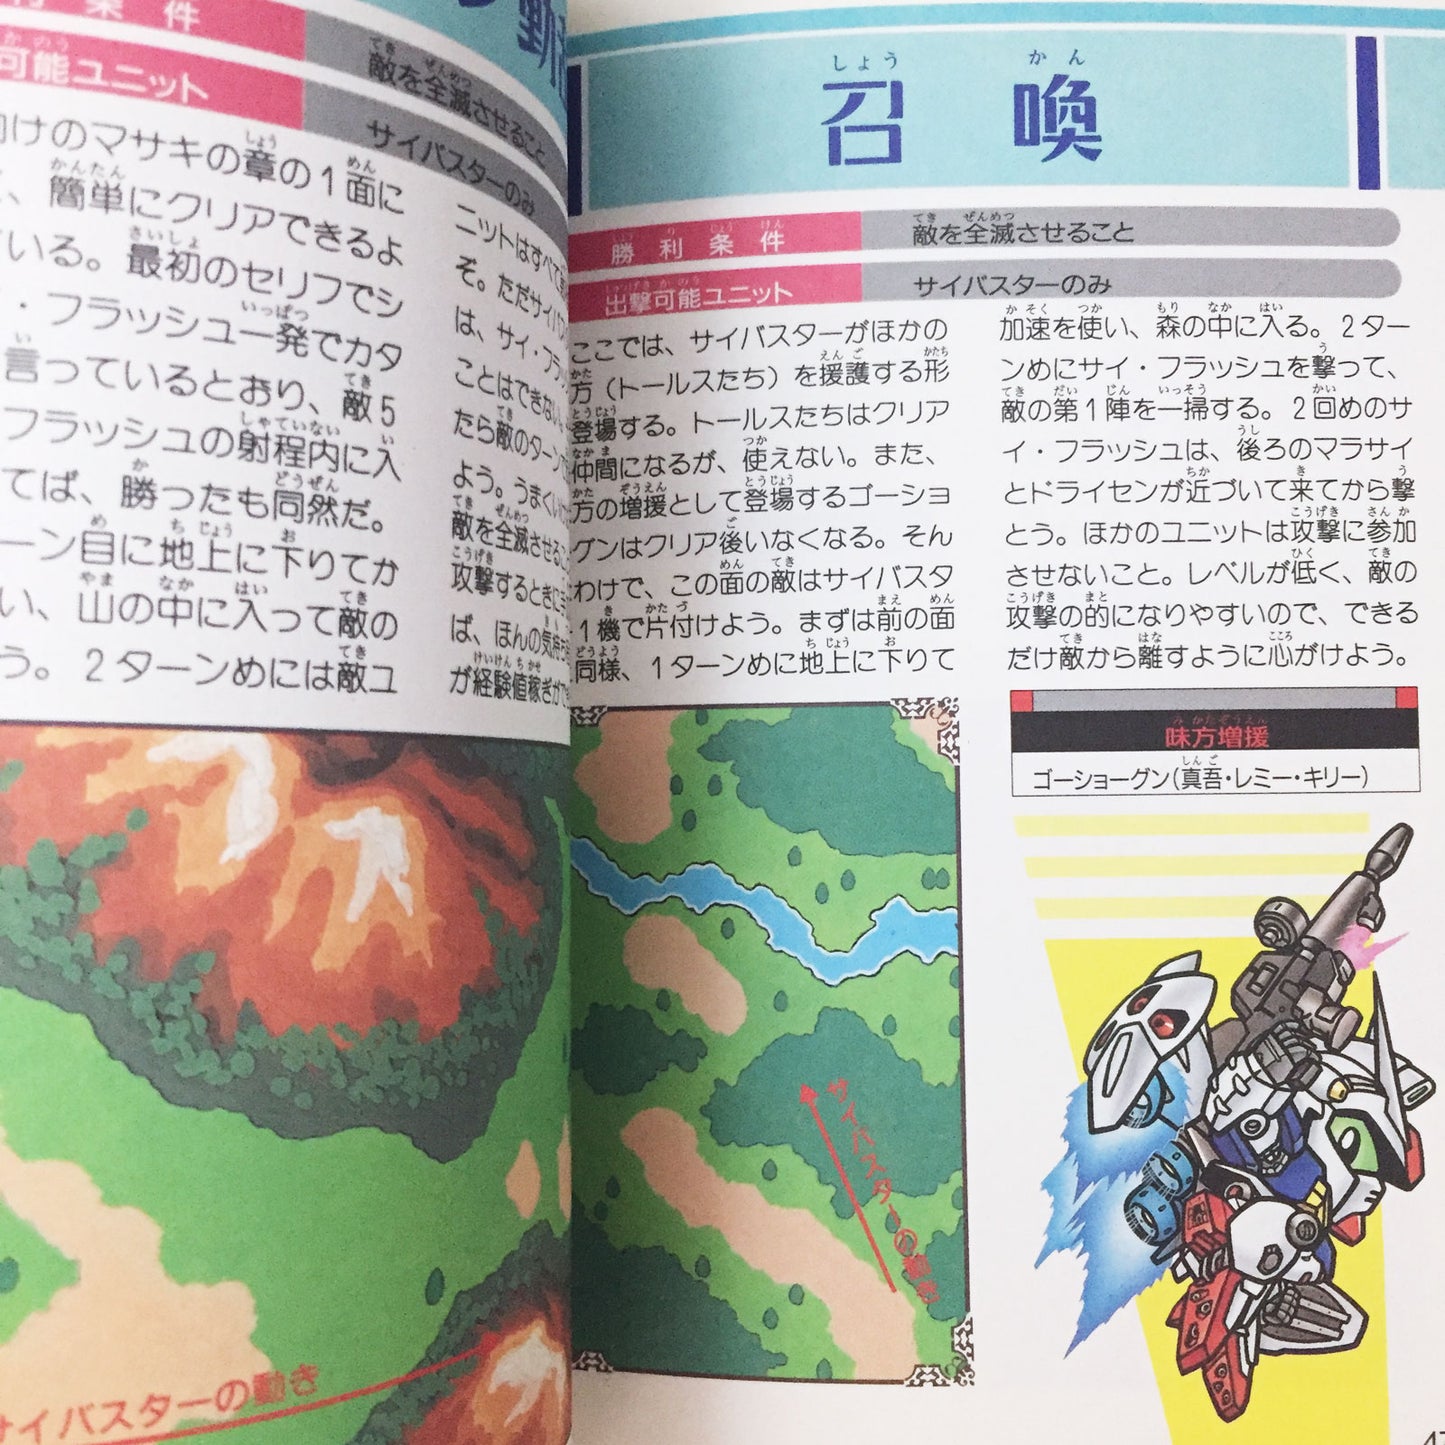 Super Robot Wars EX Strategy Guide Book